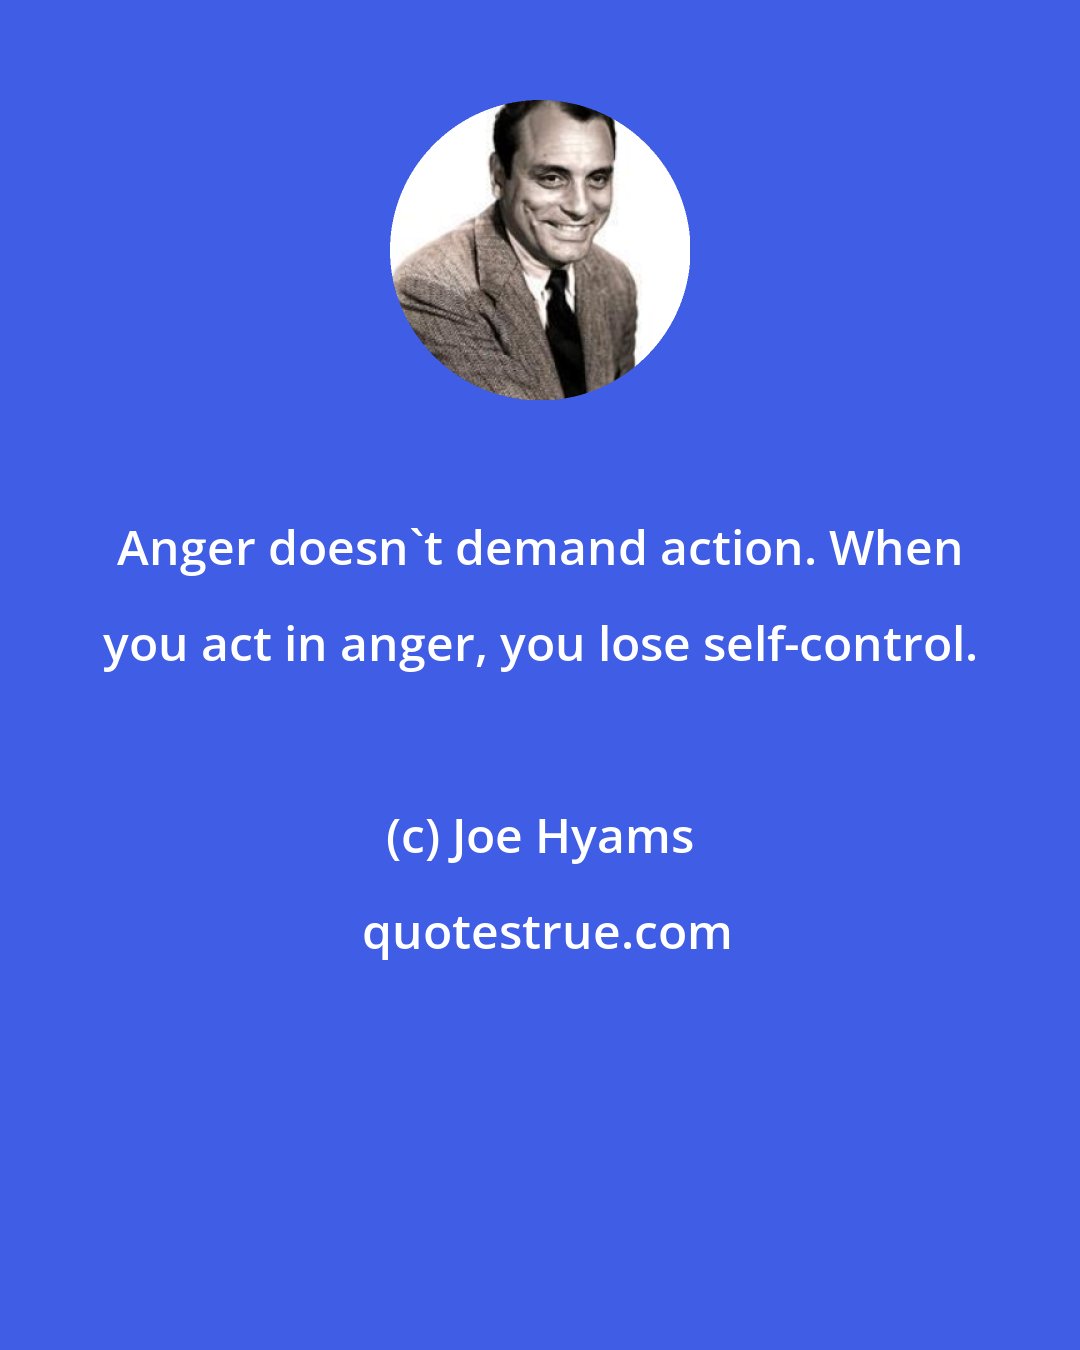 Joe Hyams: Anger doesn't demand action. When you act in anger, you lose self-control.